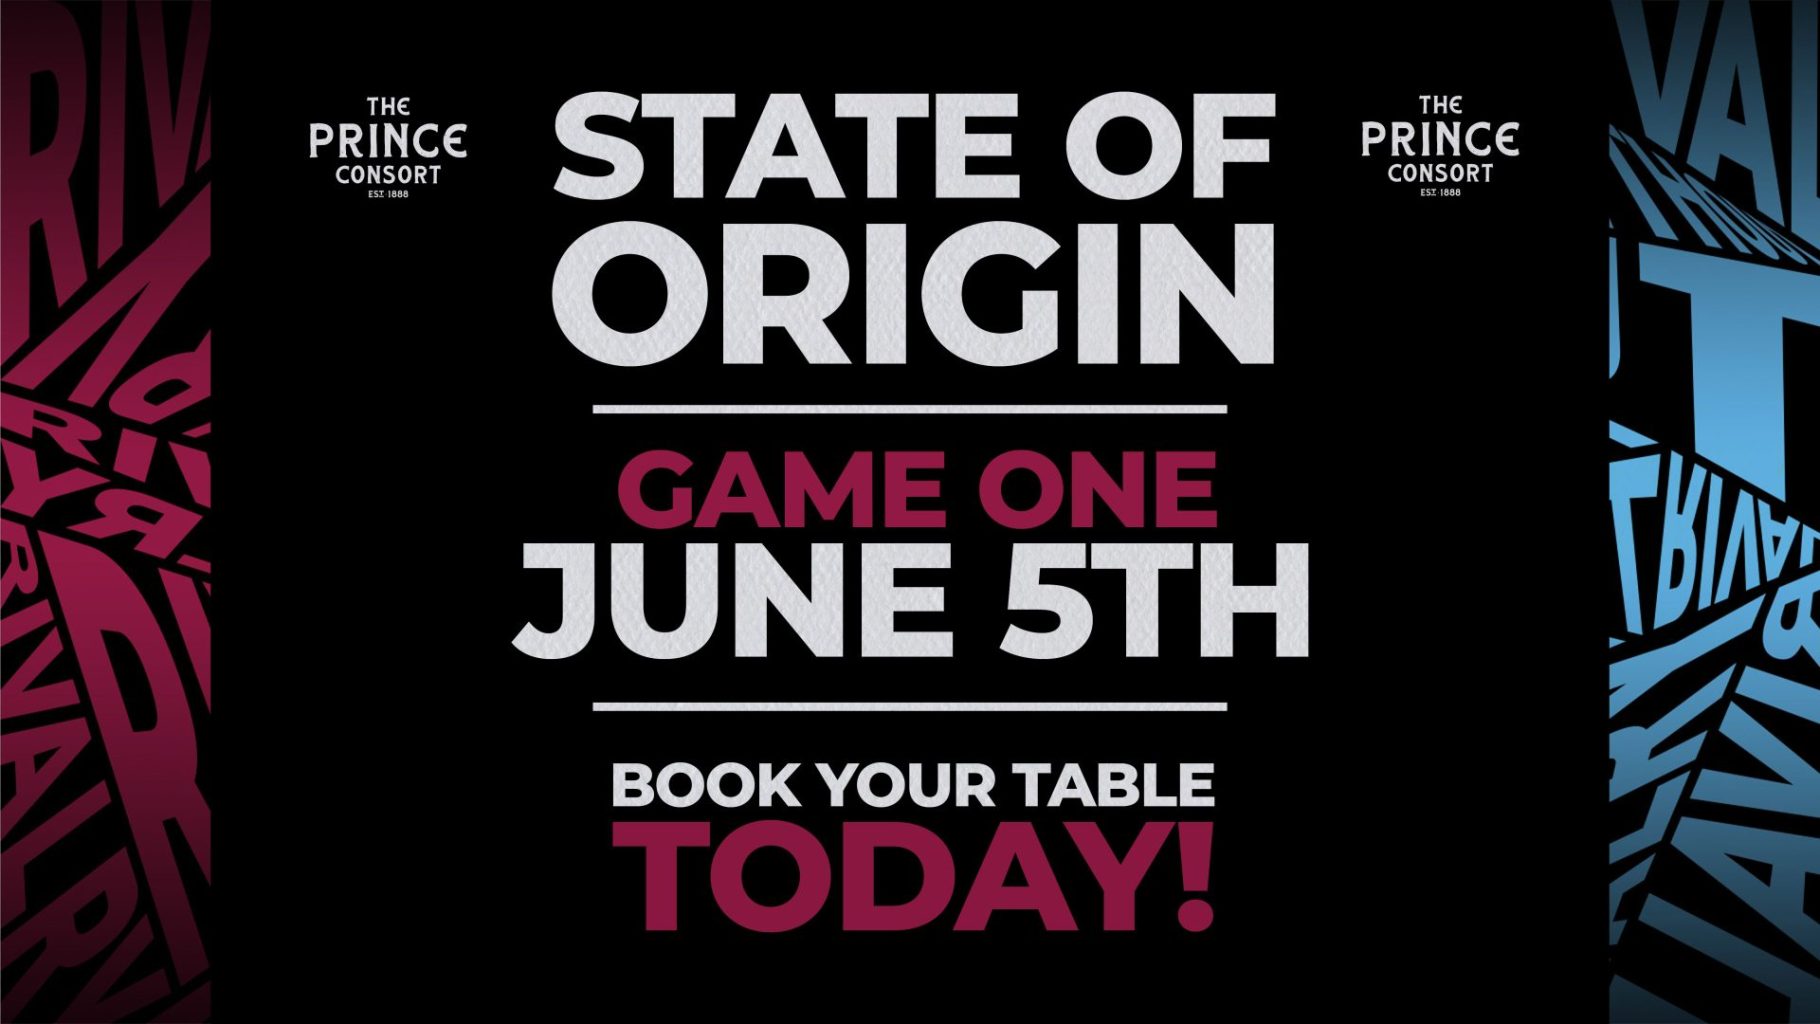 Get Your Tickets to State of Origin Game One | Whats on at The Prince Consort